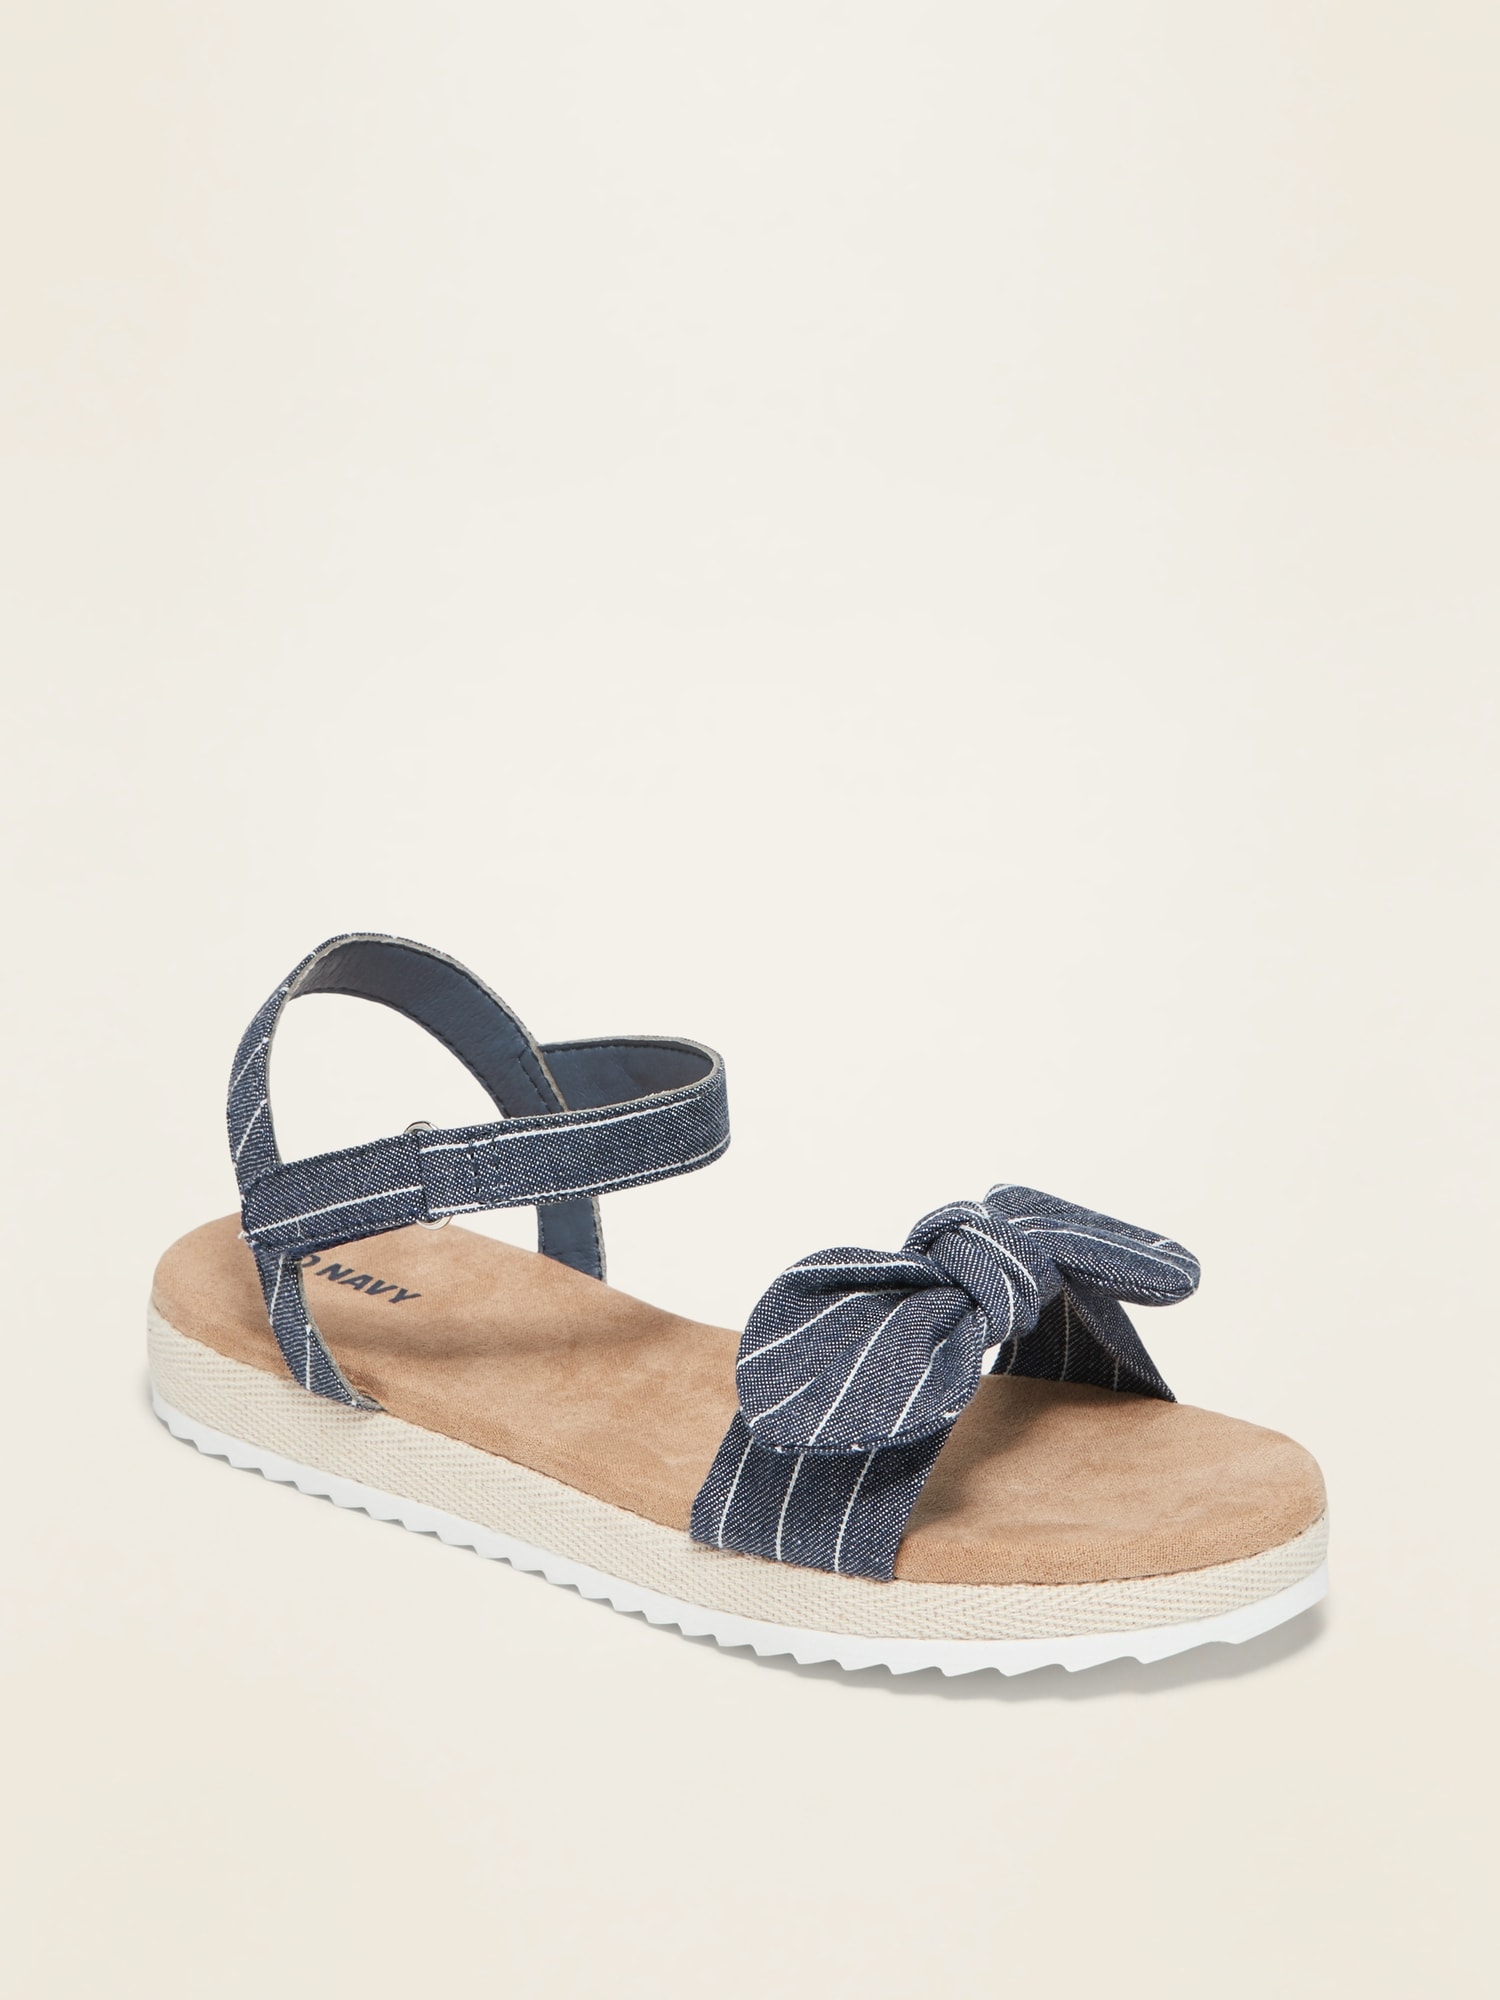 Striped-Chambray Bow-Tie Sandals for Girls